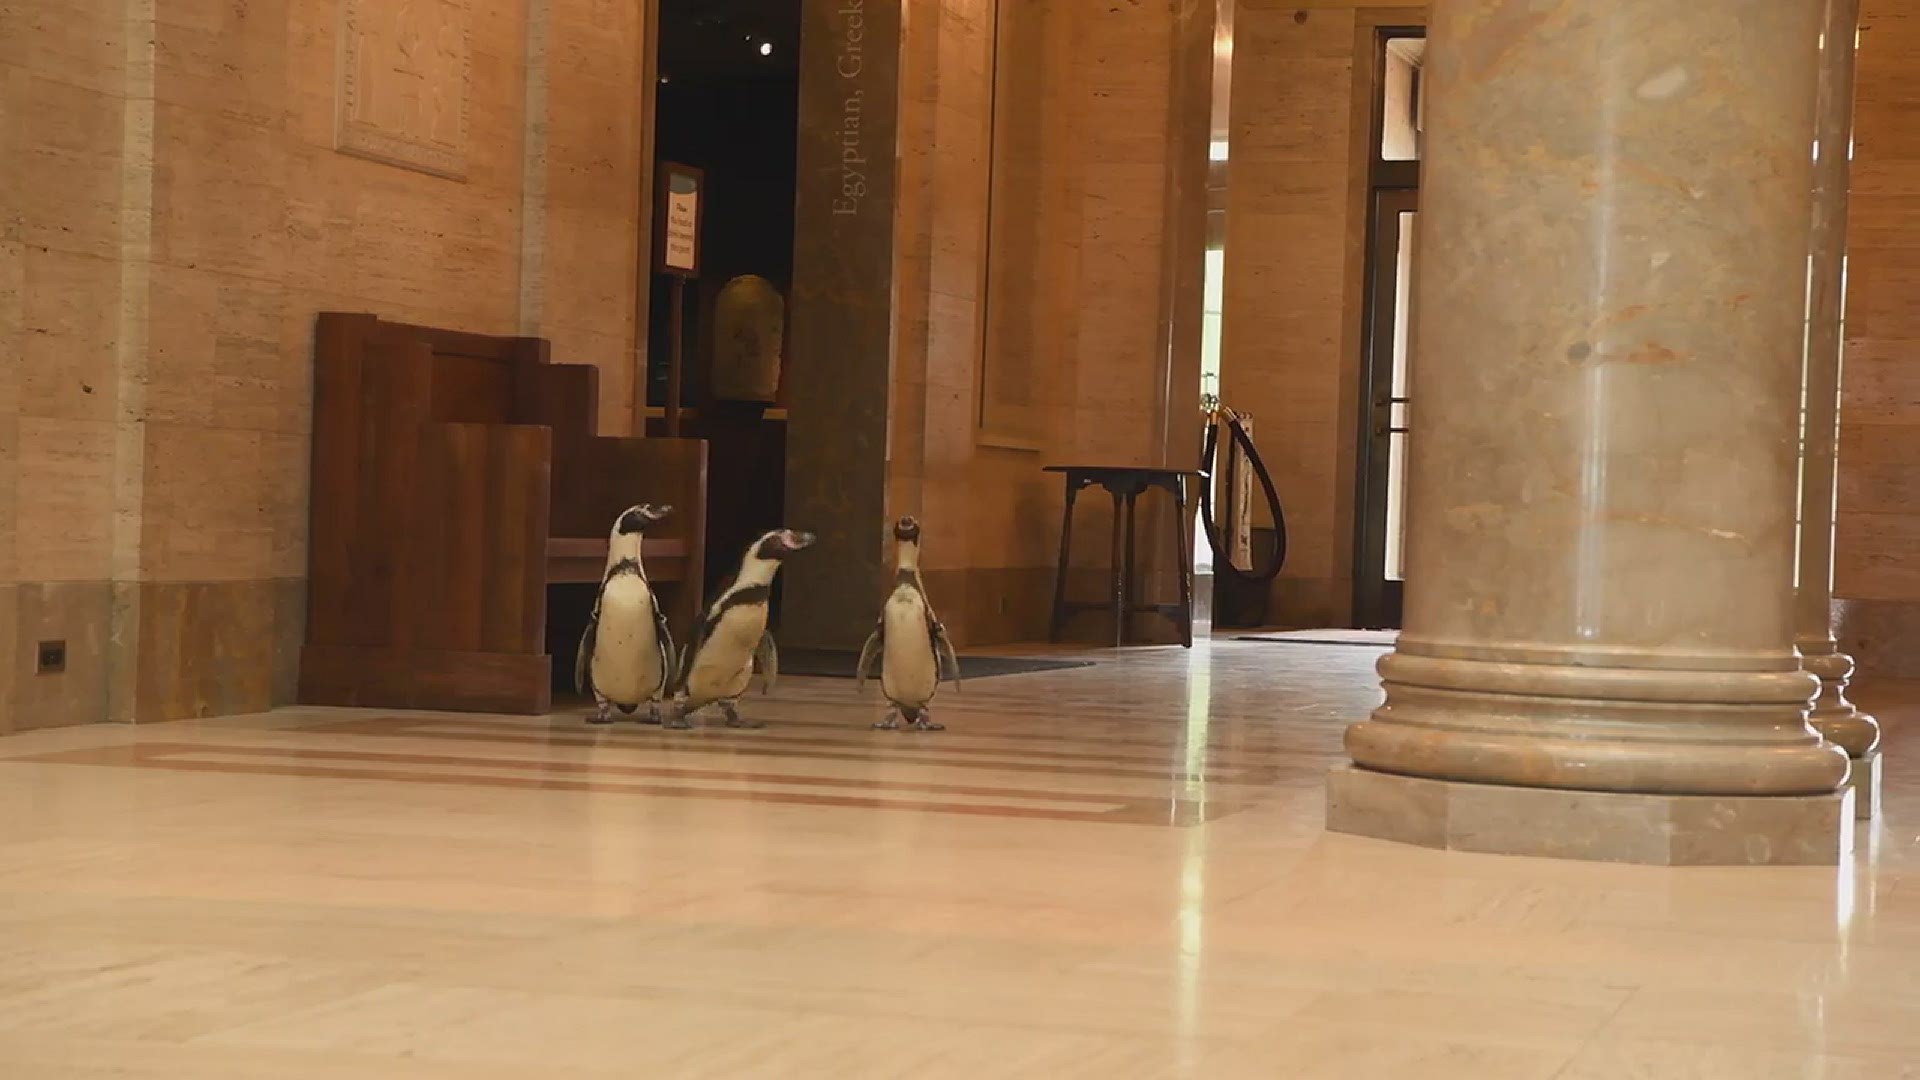 These penguins were treated to a little culture this week.